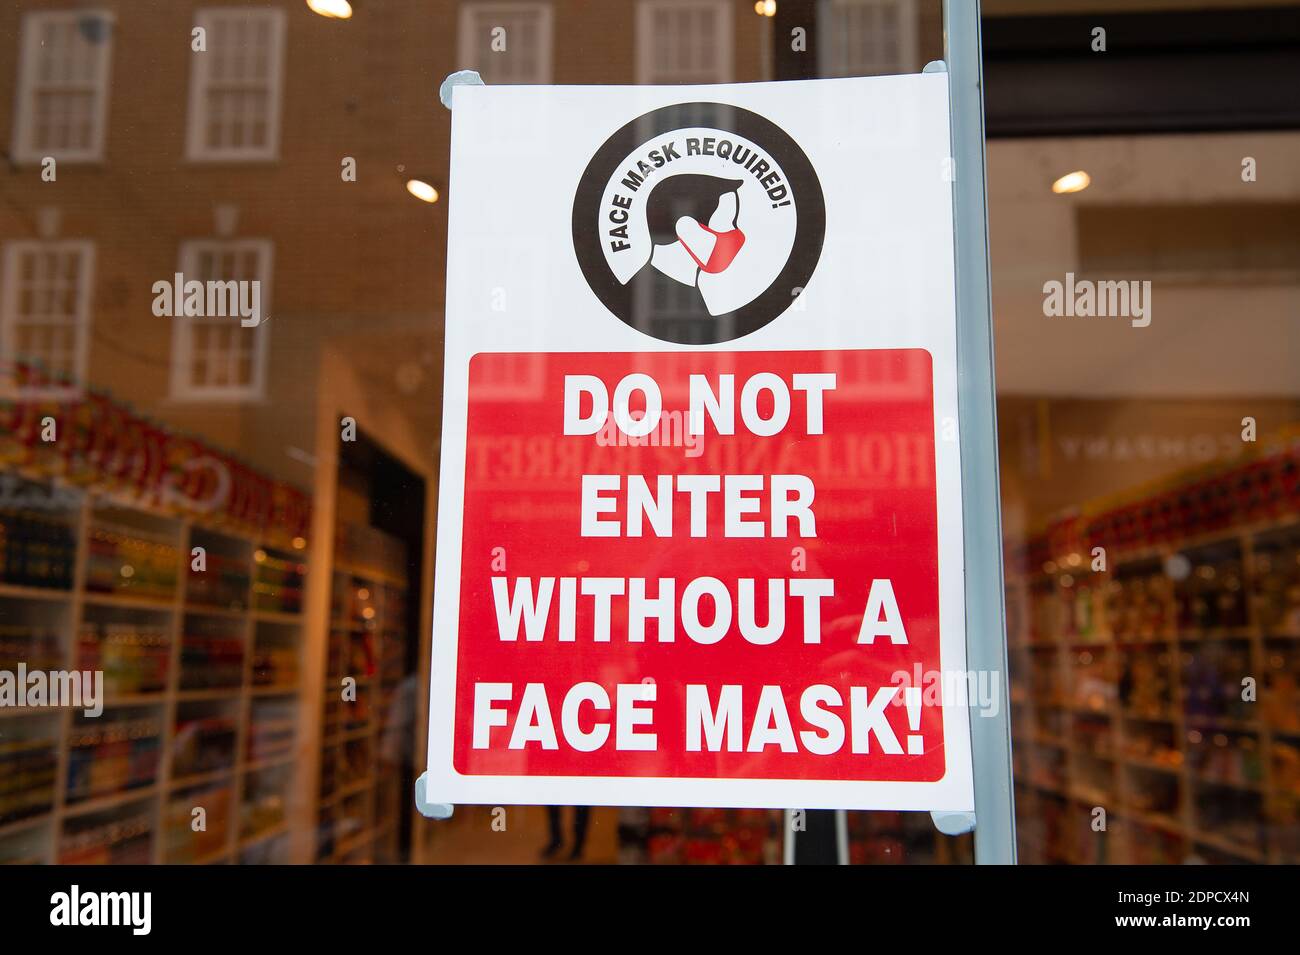 Windsor, Berkshire, UK. 2 November, 2020. A face mask required sign in the window at a new American Candy shop that has opened in Windsor. Shoppers were out in Windsor today buying Christmas presents and provisions before England goes back into a Covid-19 lockdown again from Thursday 5th November. Another 202 cases of Coronavirus were recorded in Berkshire in figures released yesterday. The Royal Borough of Windsor and Maidenhead now has 1,543 positive cases up 36 on the day before. Credit: Maureen McLean/Alamy Stock Photo